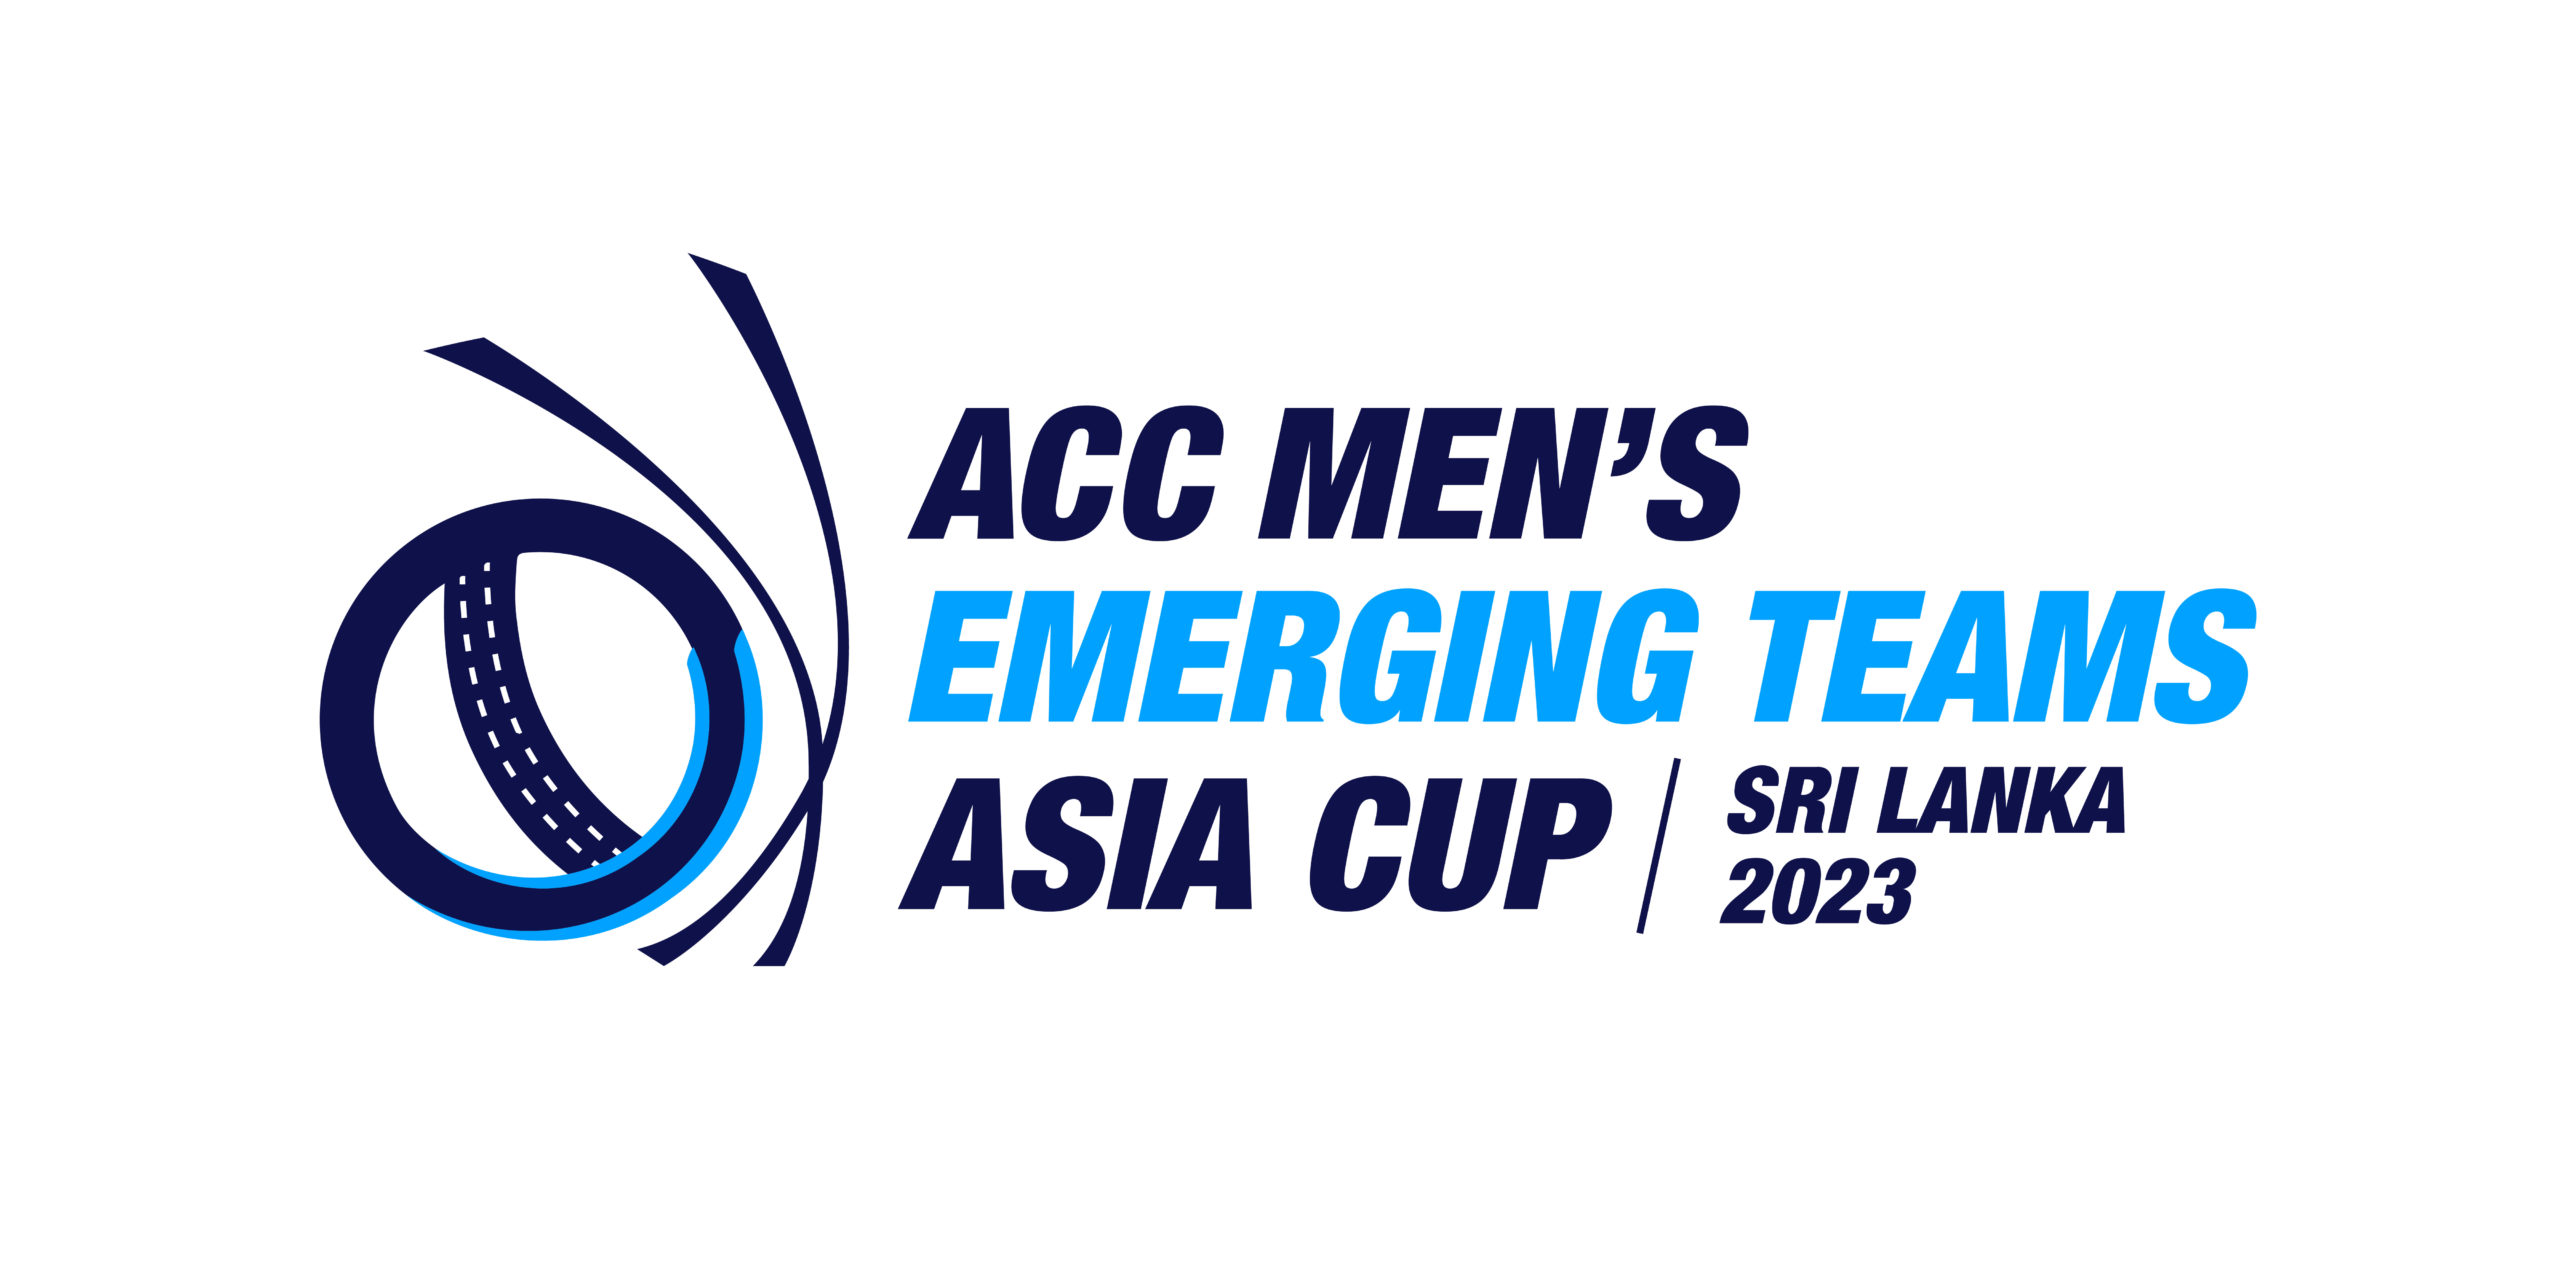 India, Oman, Nepal To Reach Sri Lanka For ACC Men’s Emerging Teams Asia Cup